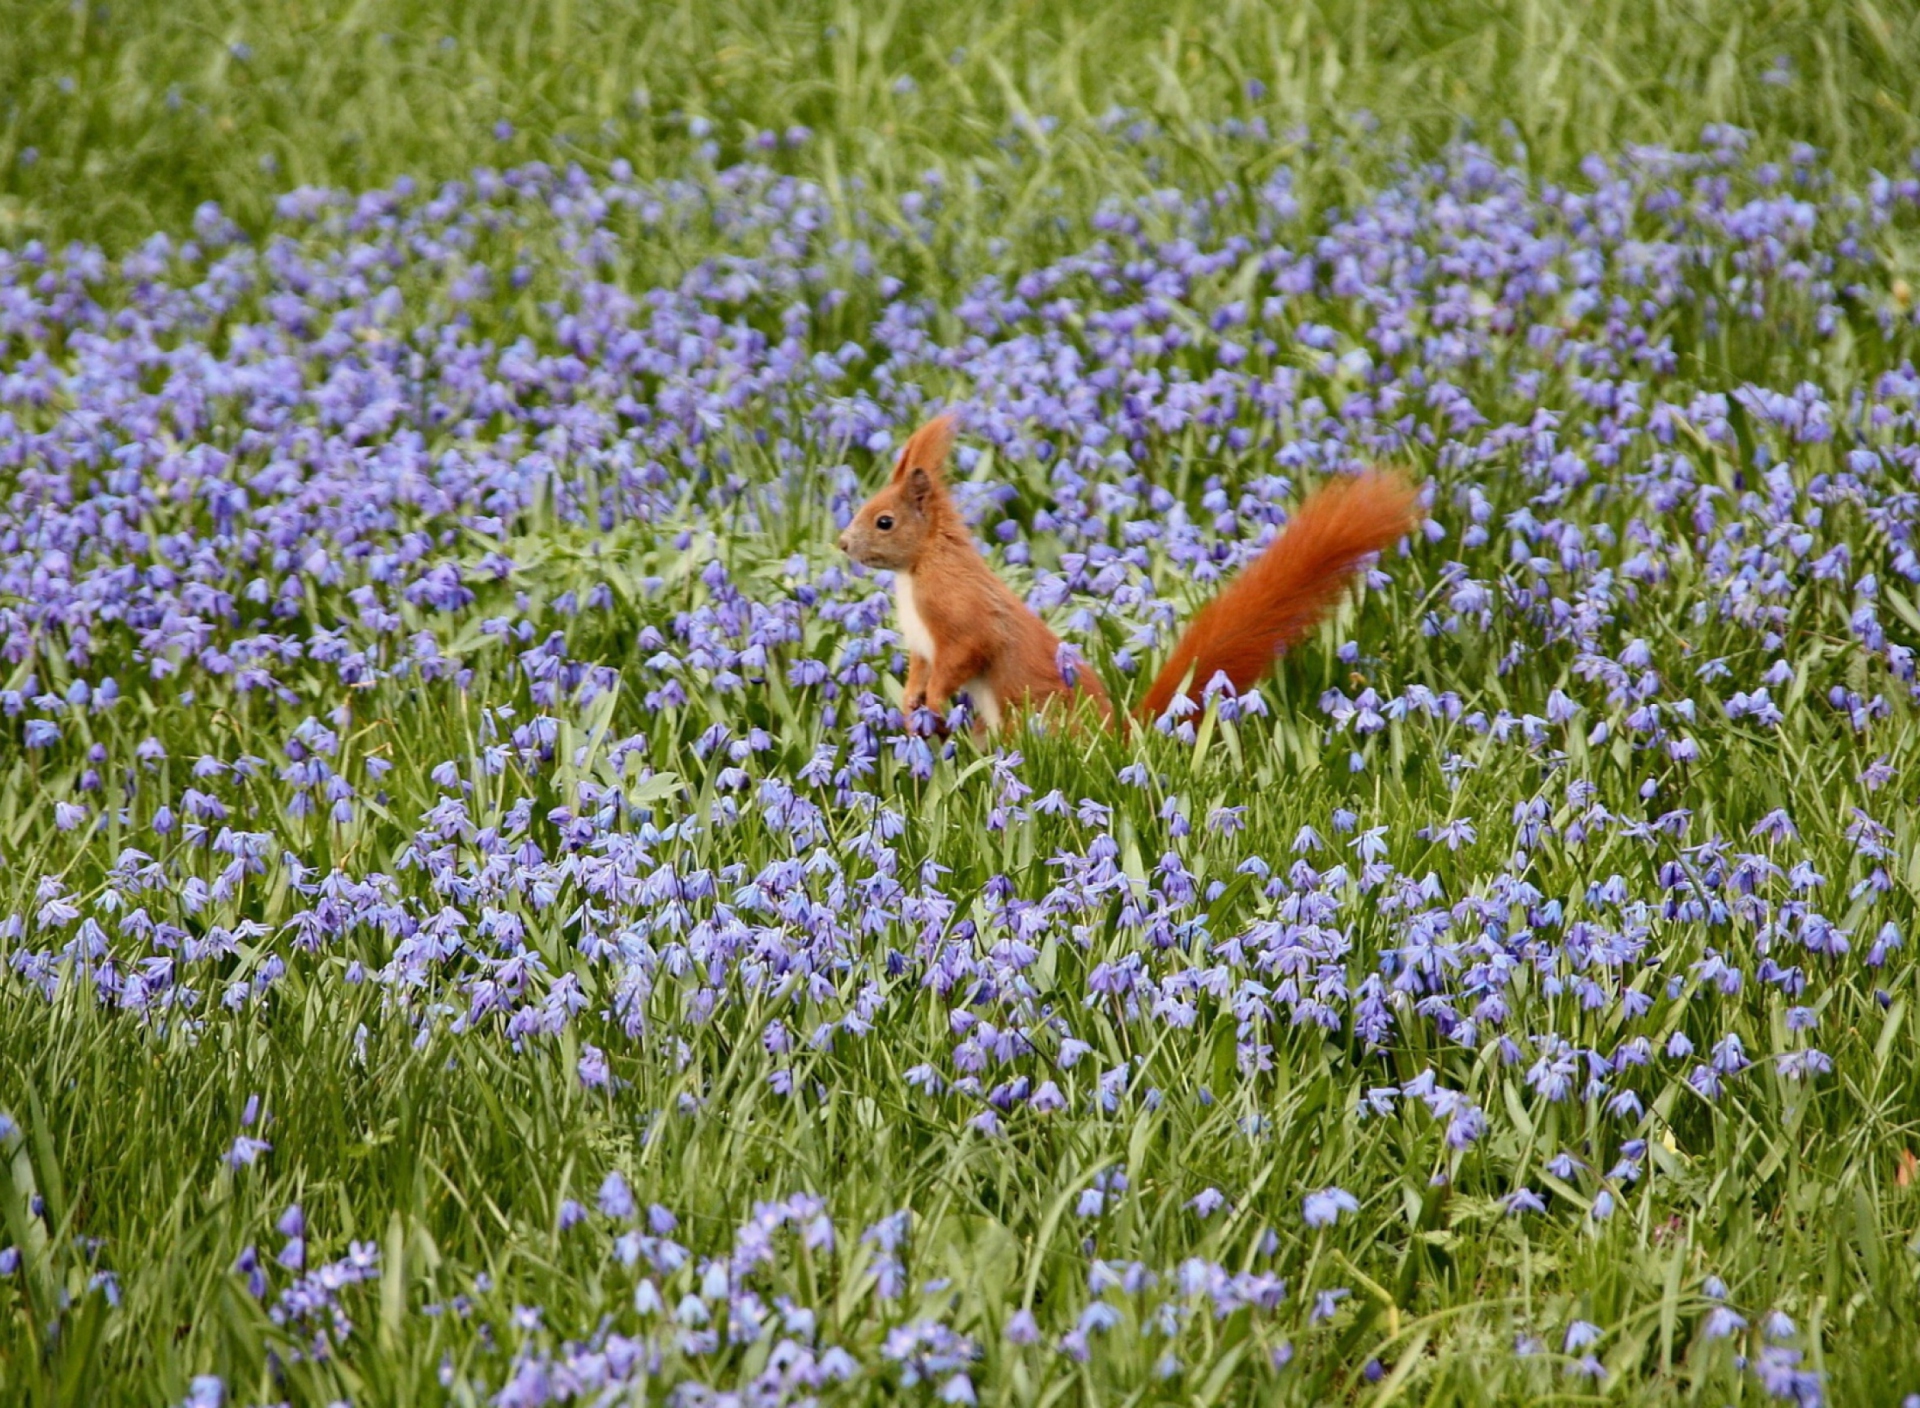 Squirrel And Blue Flowers wallpaper 1920x1408